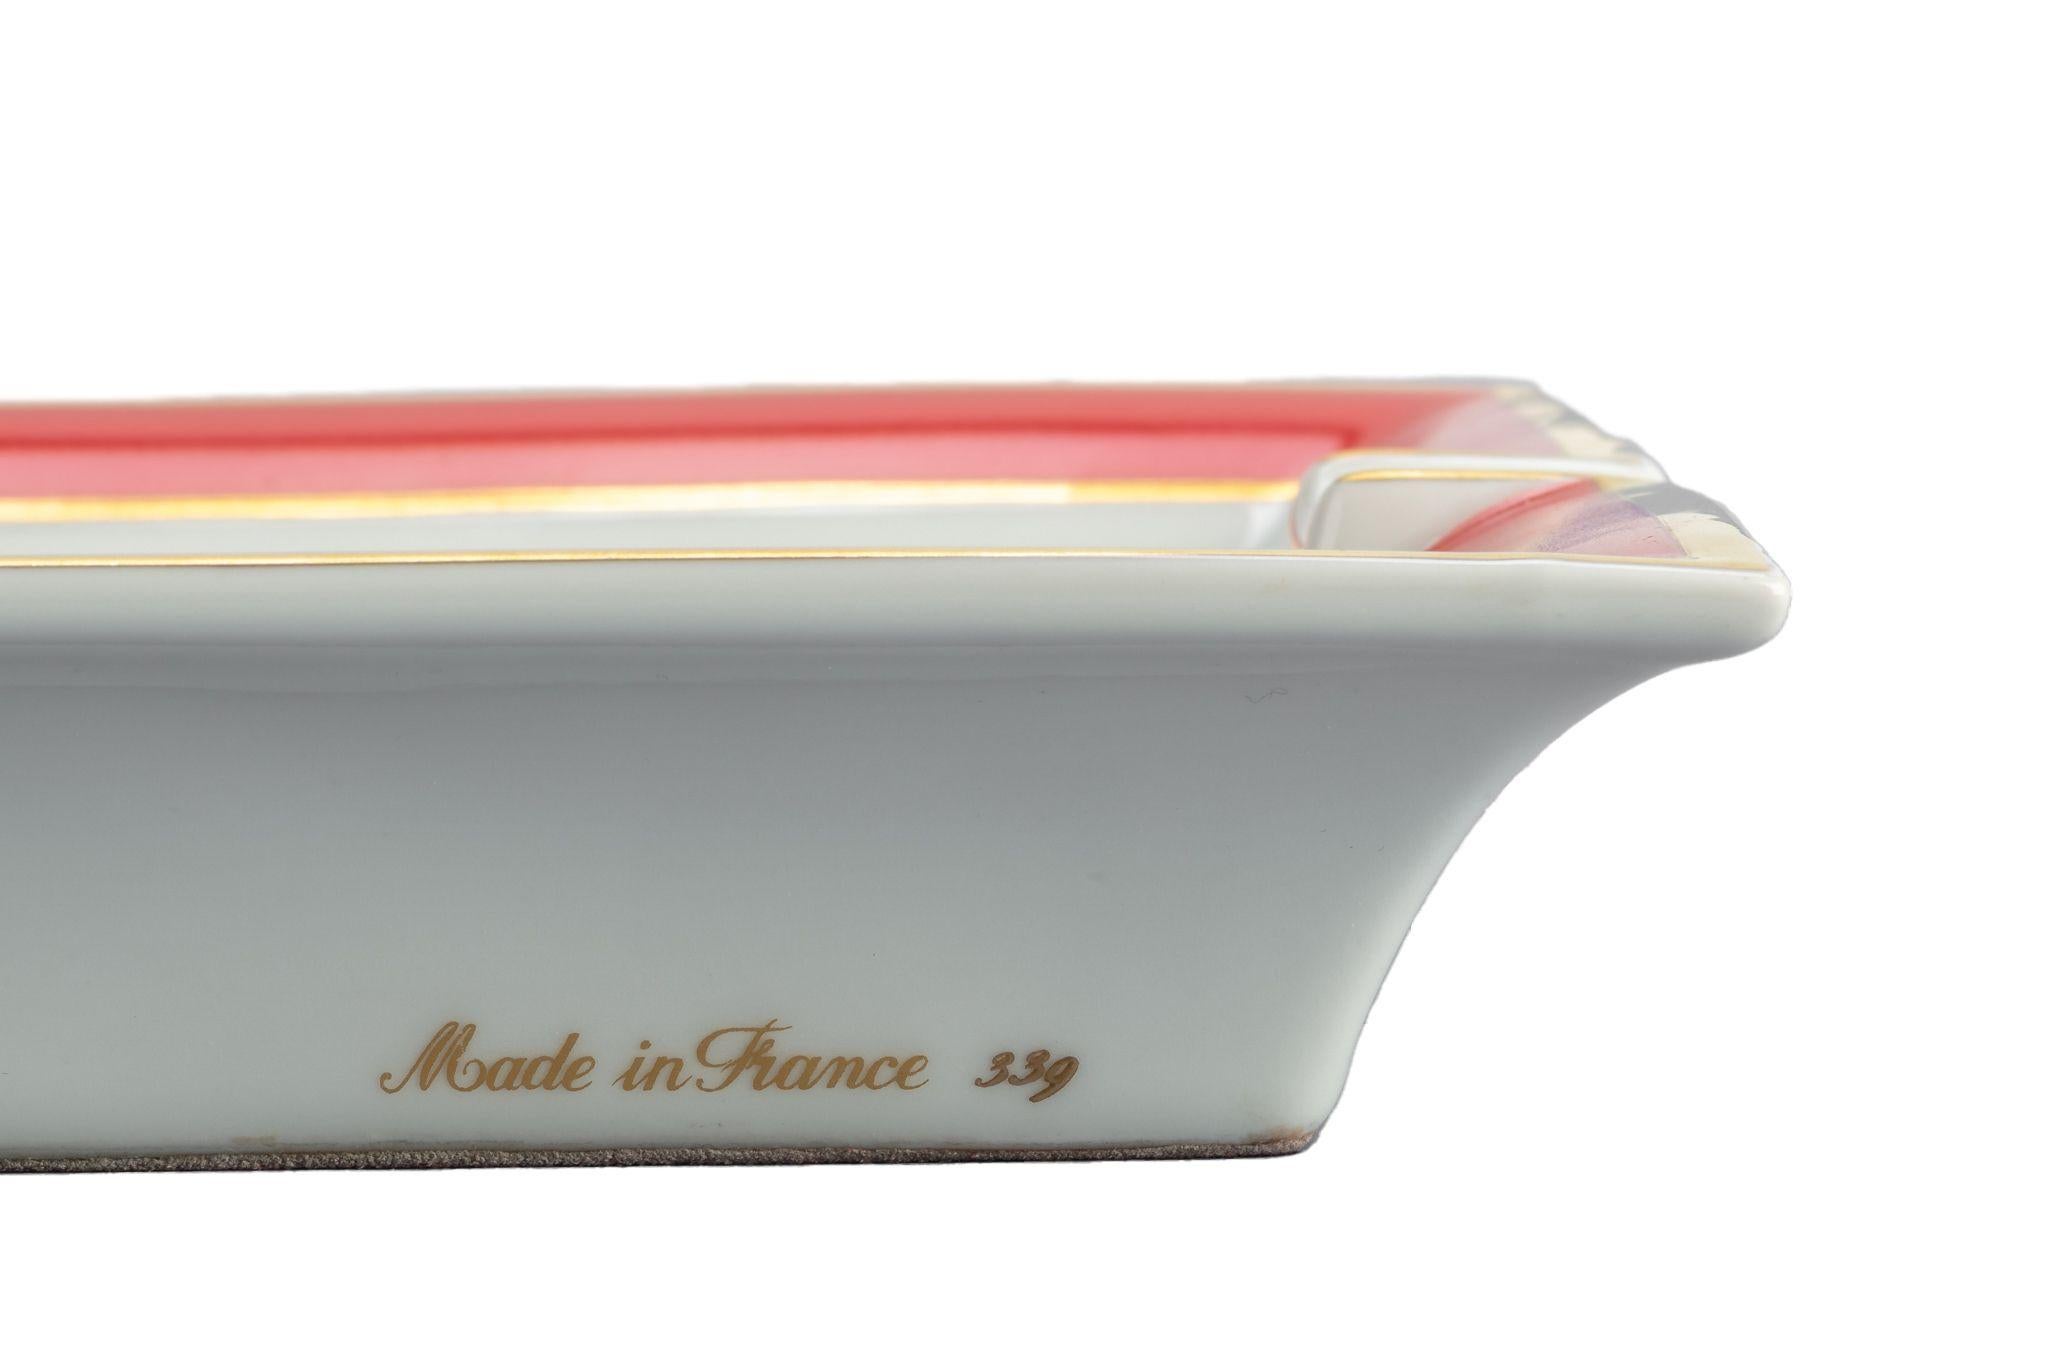 Hermes Red Bird Porcelain Ashtray In Excellent Condition For Sale In West Hollywood, CA